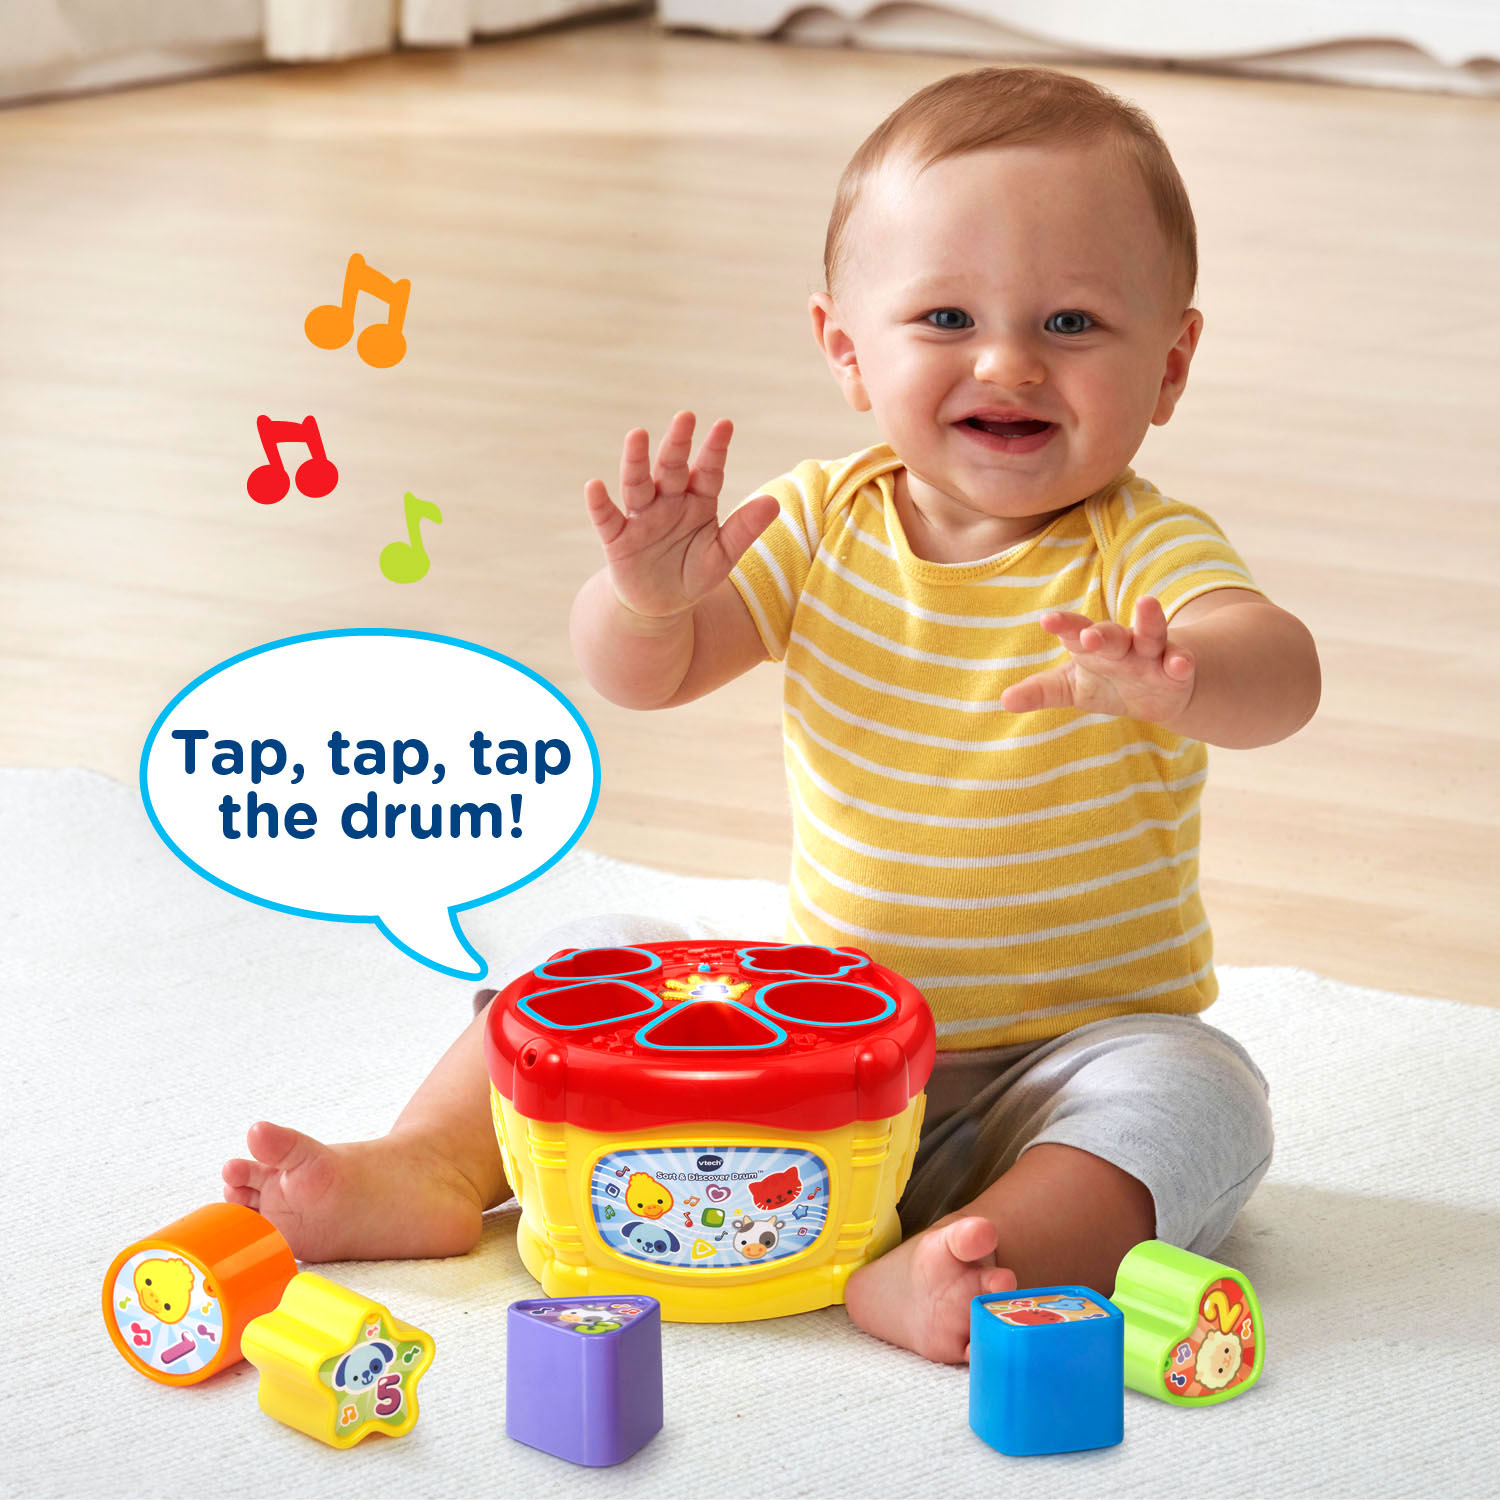 VTech, Sort and Discover Drum, Interactive Learning Toy, Baby Drum - image 5 of 9